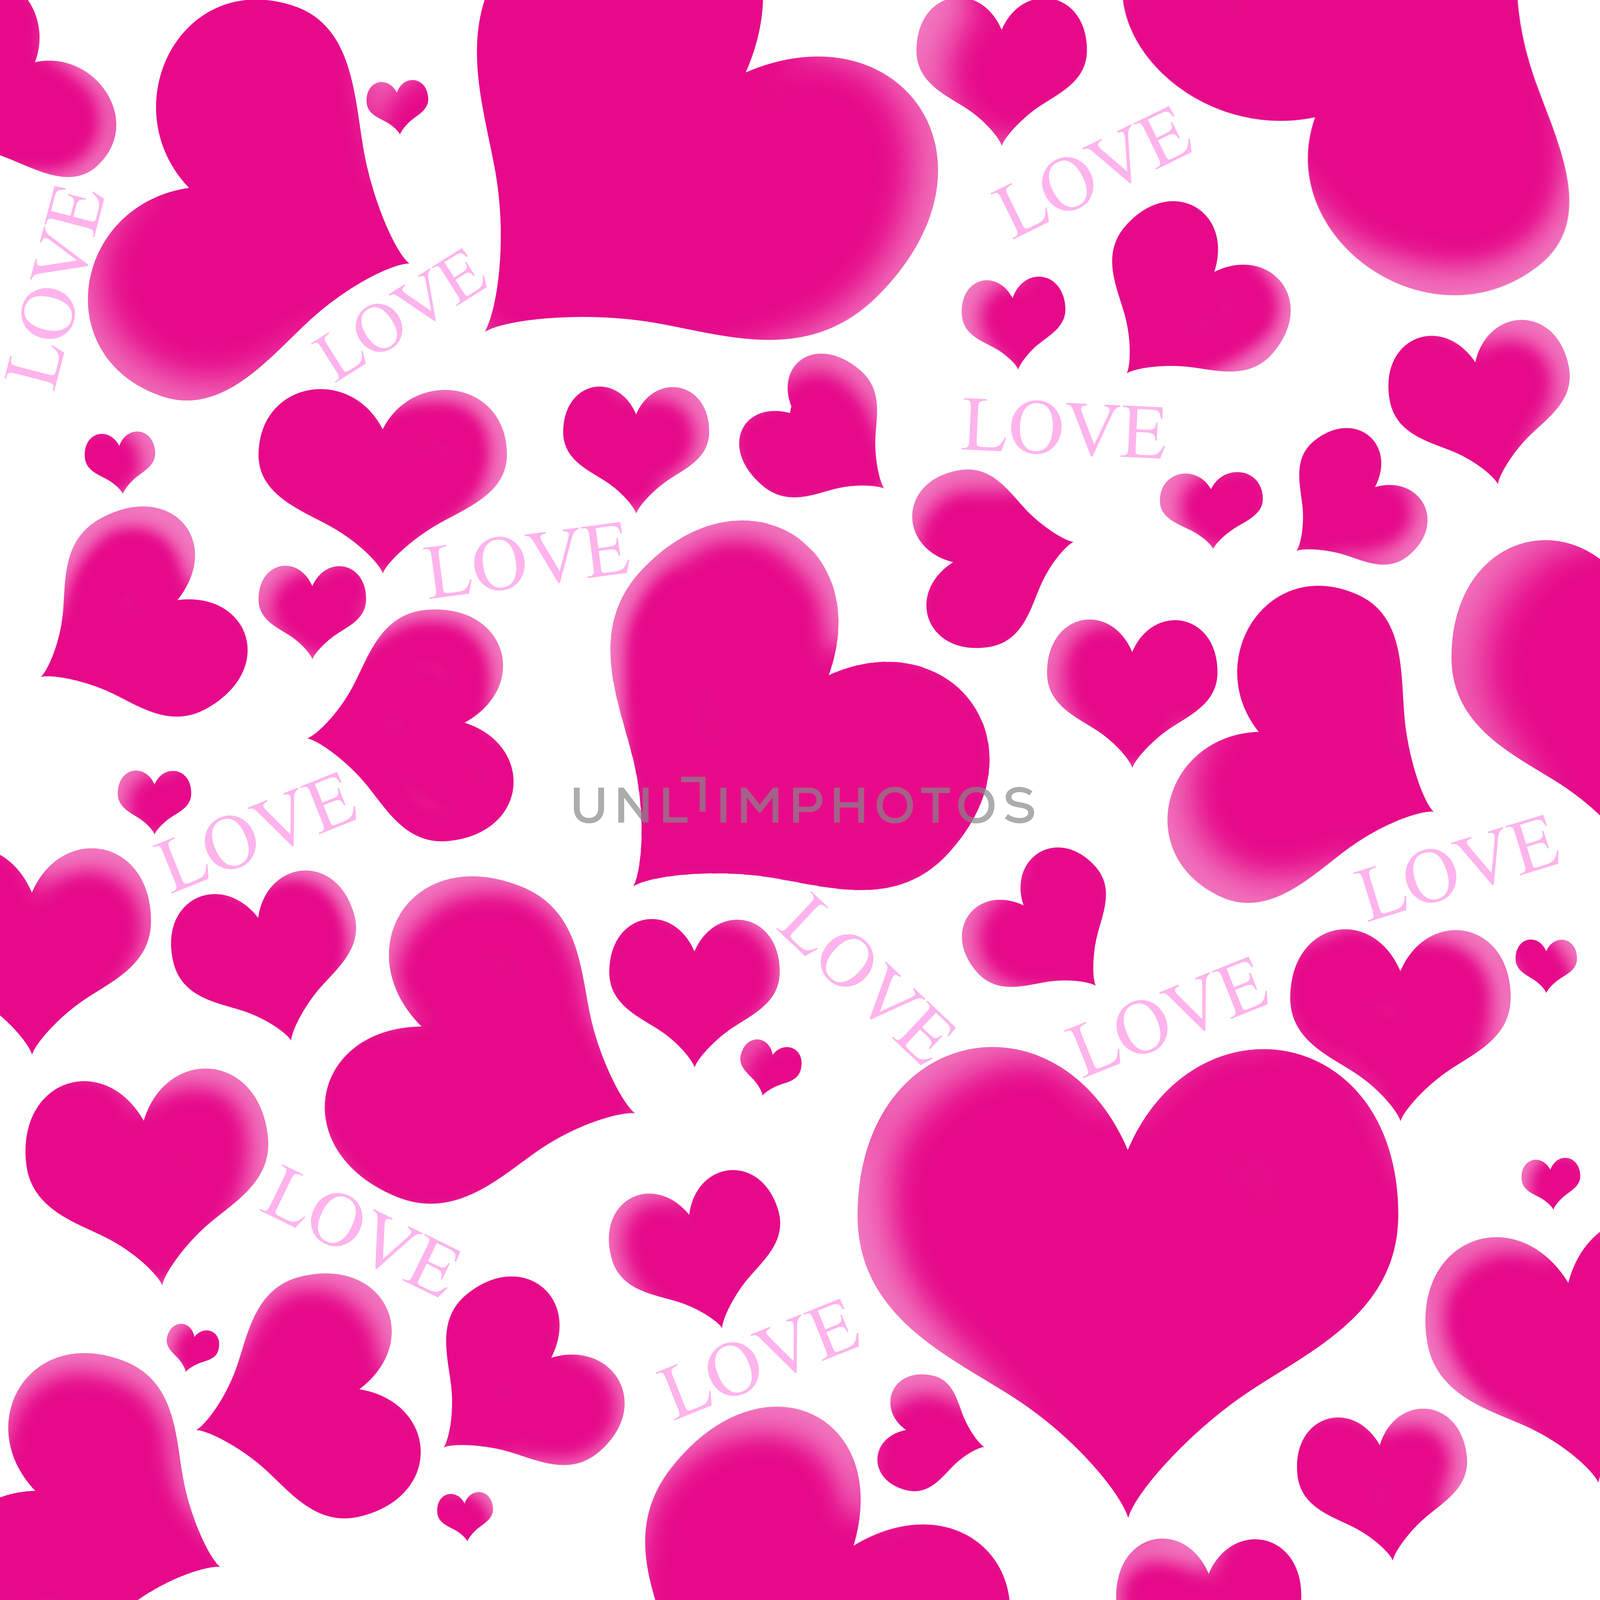 Pink hearts and LOVE wording by Gamjai